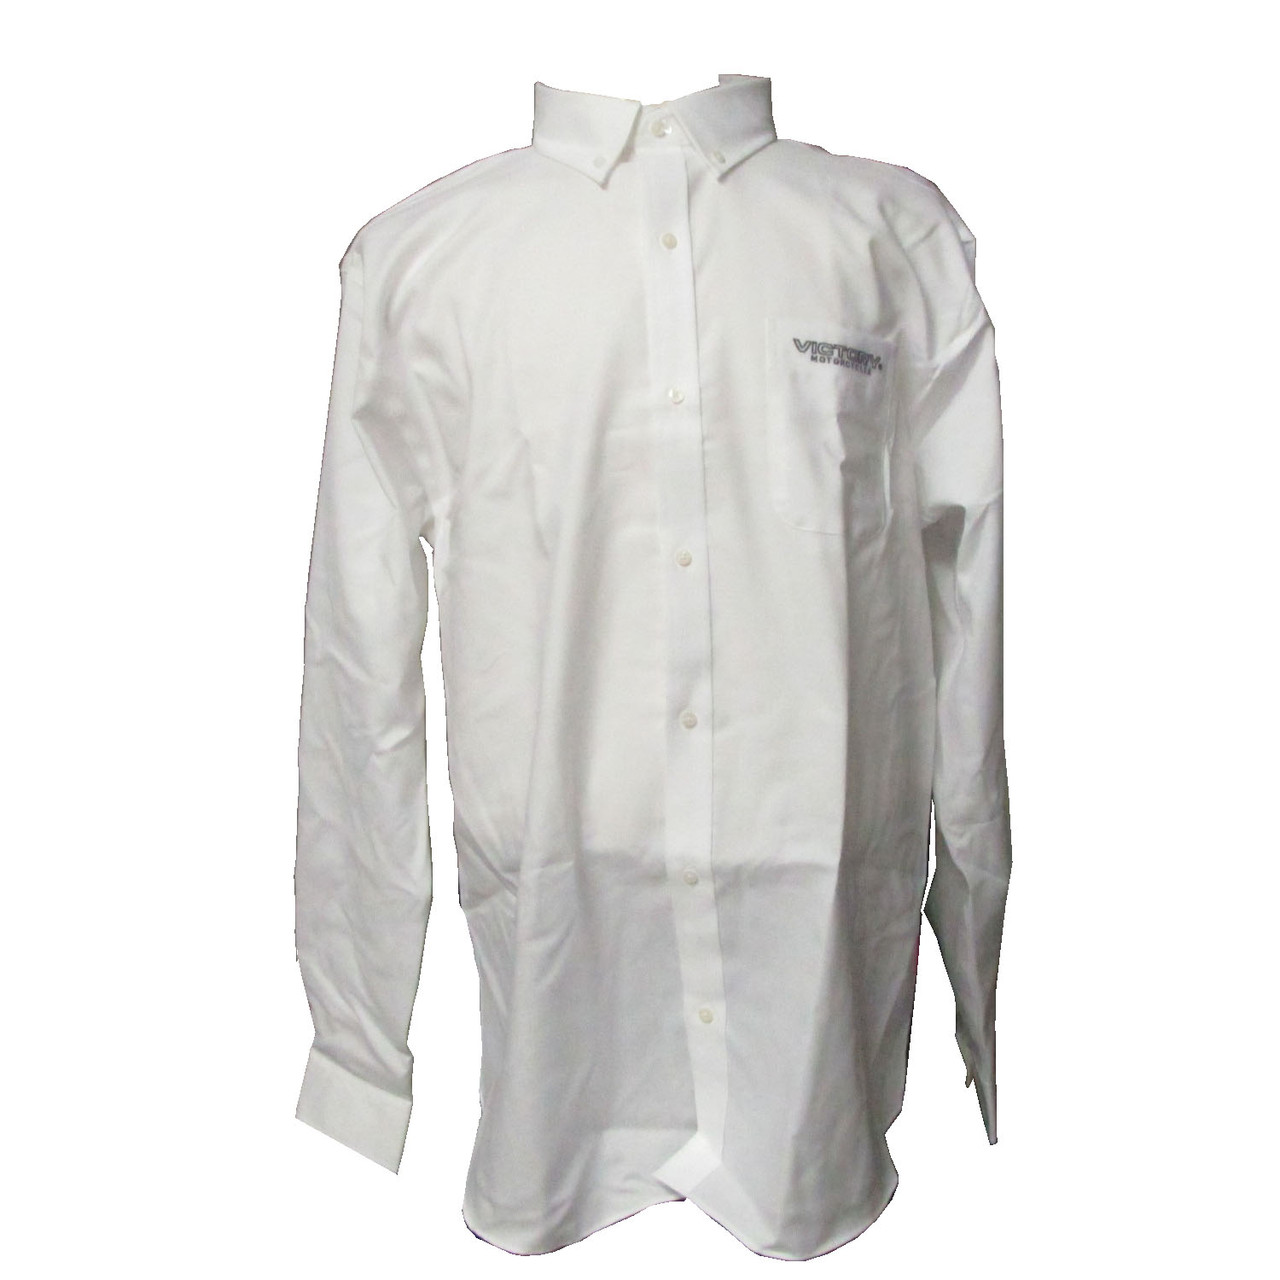 Victory Motorcycle New OEM Women's White Corp Shirt, 2X-Large, 286440312